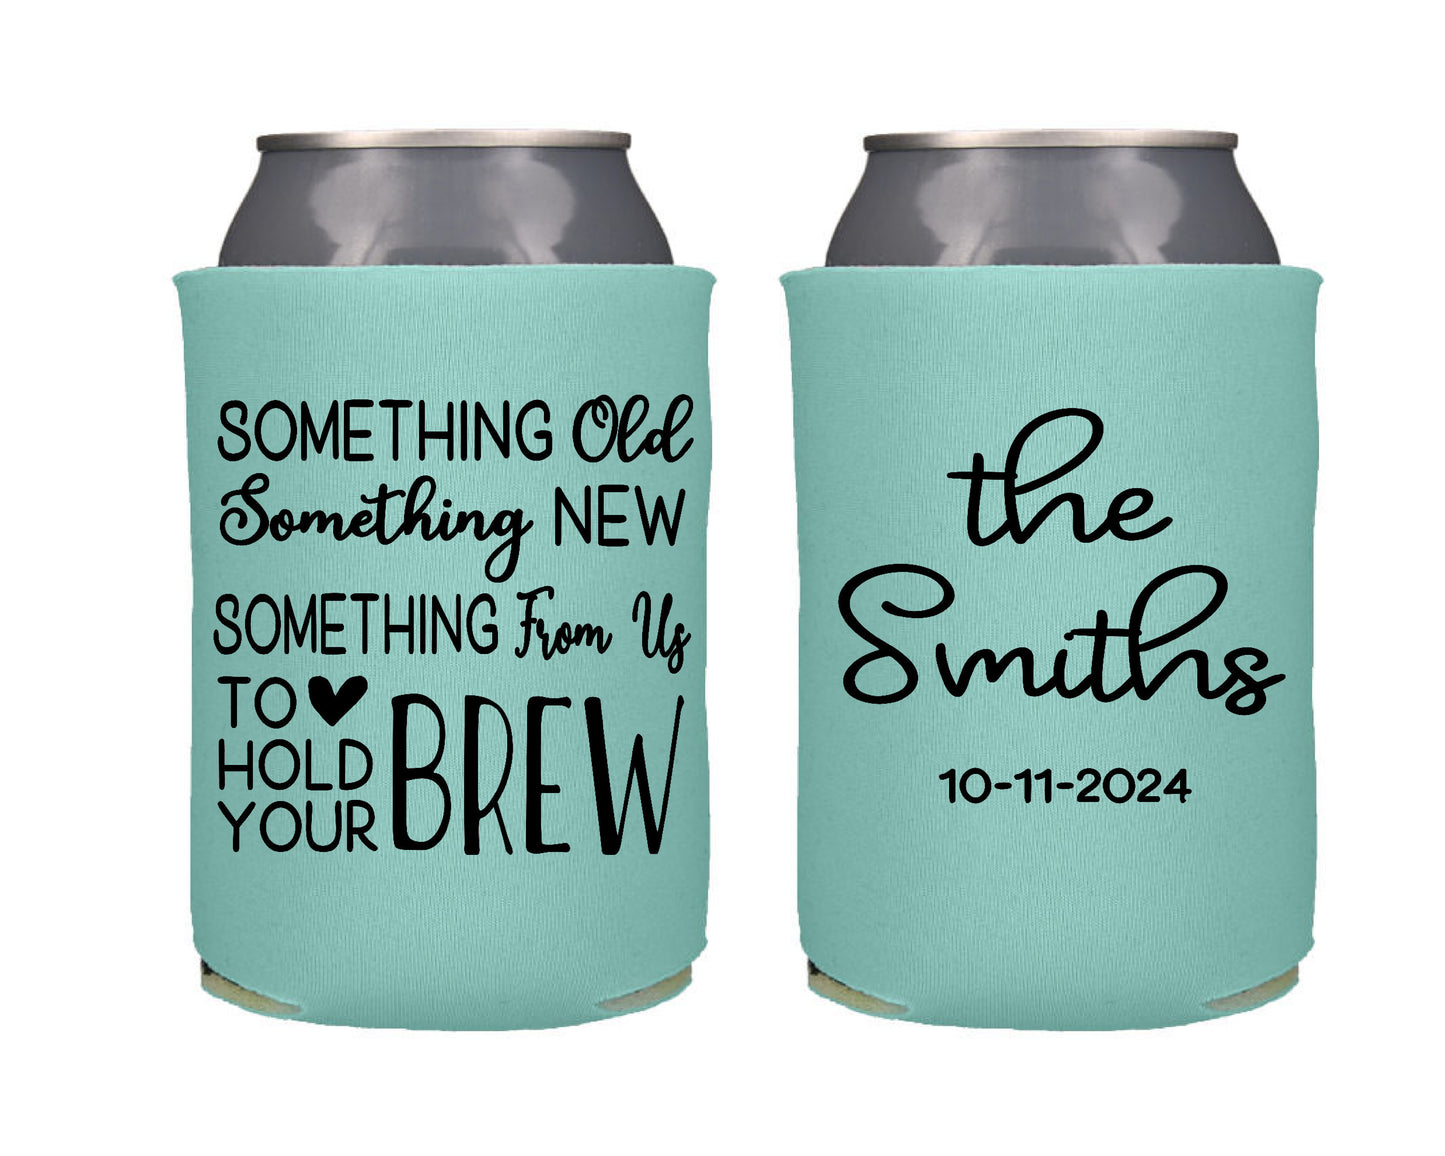 Something Old Something New Something to Hold Your Brew Screen Printed Can Cooler